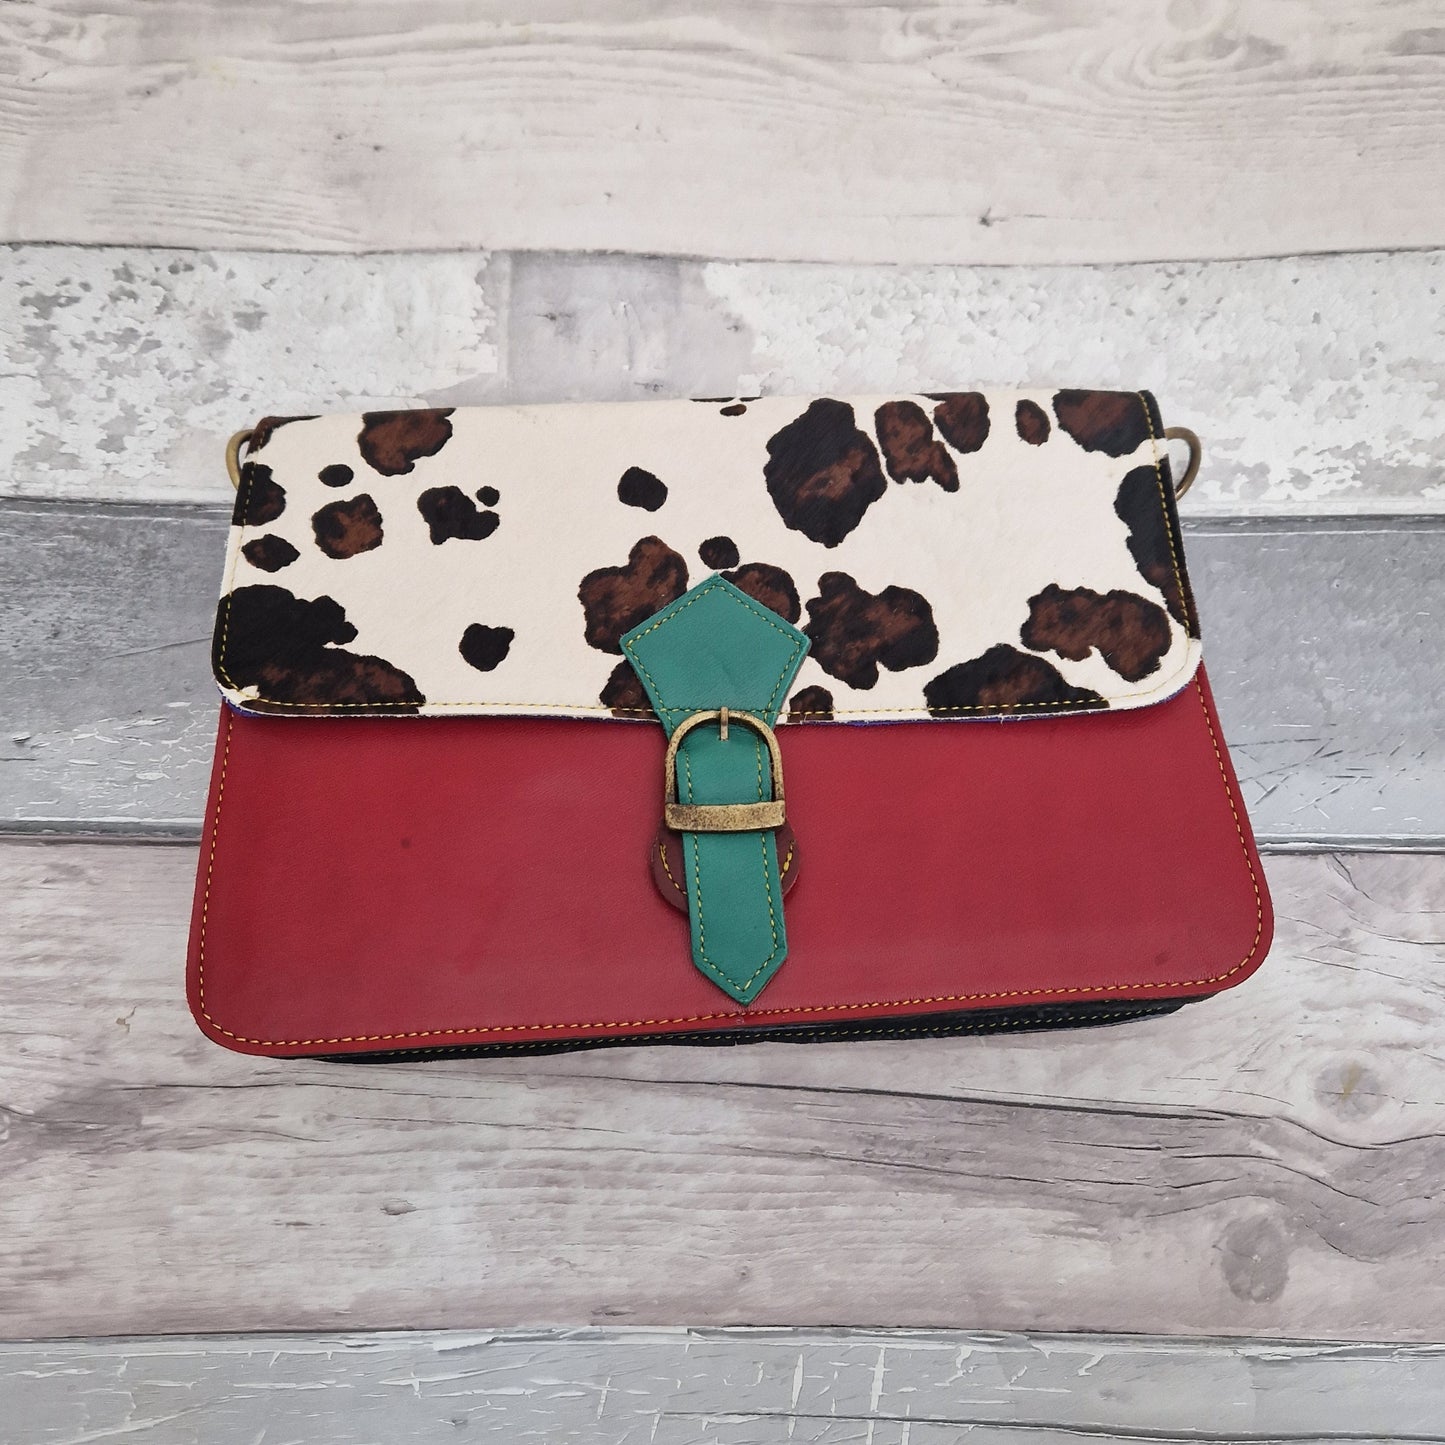 Striking red leather bag with a textured panel of black and white cow print.